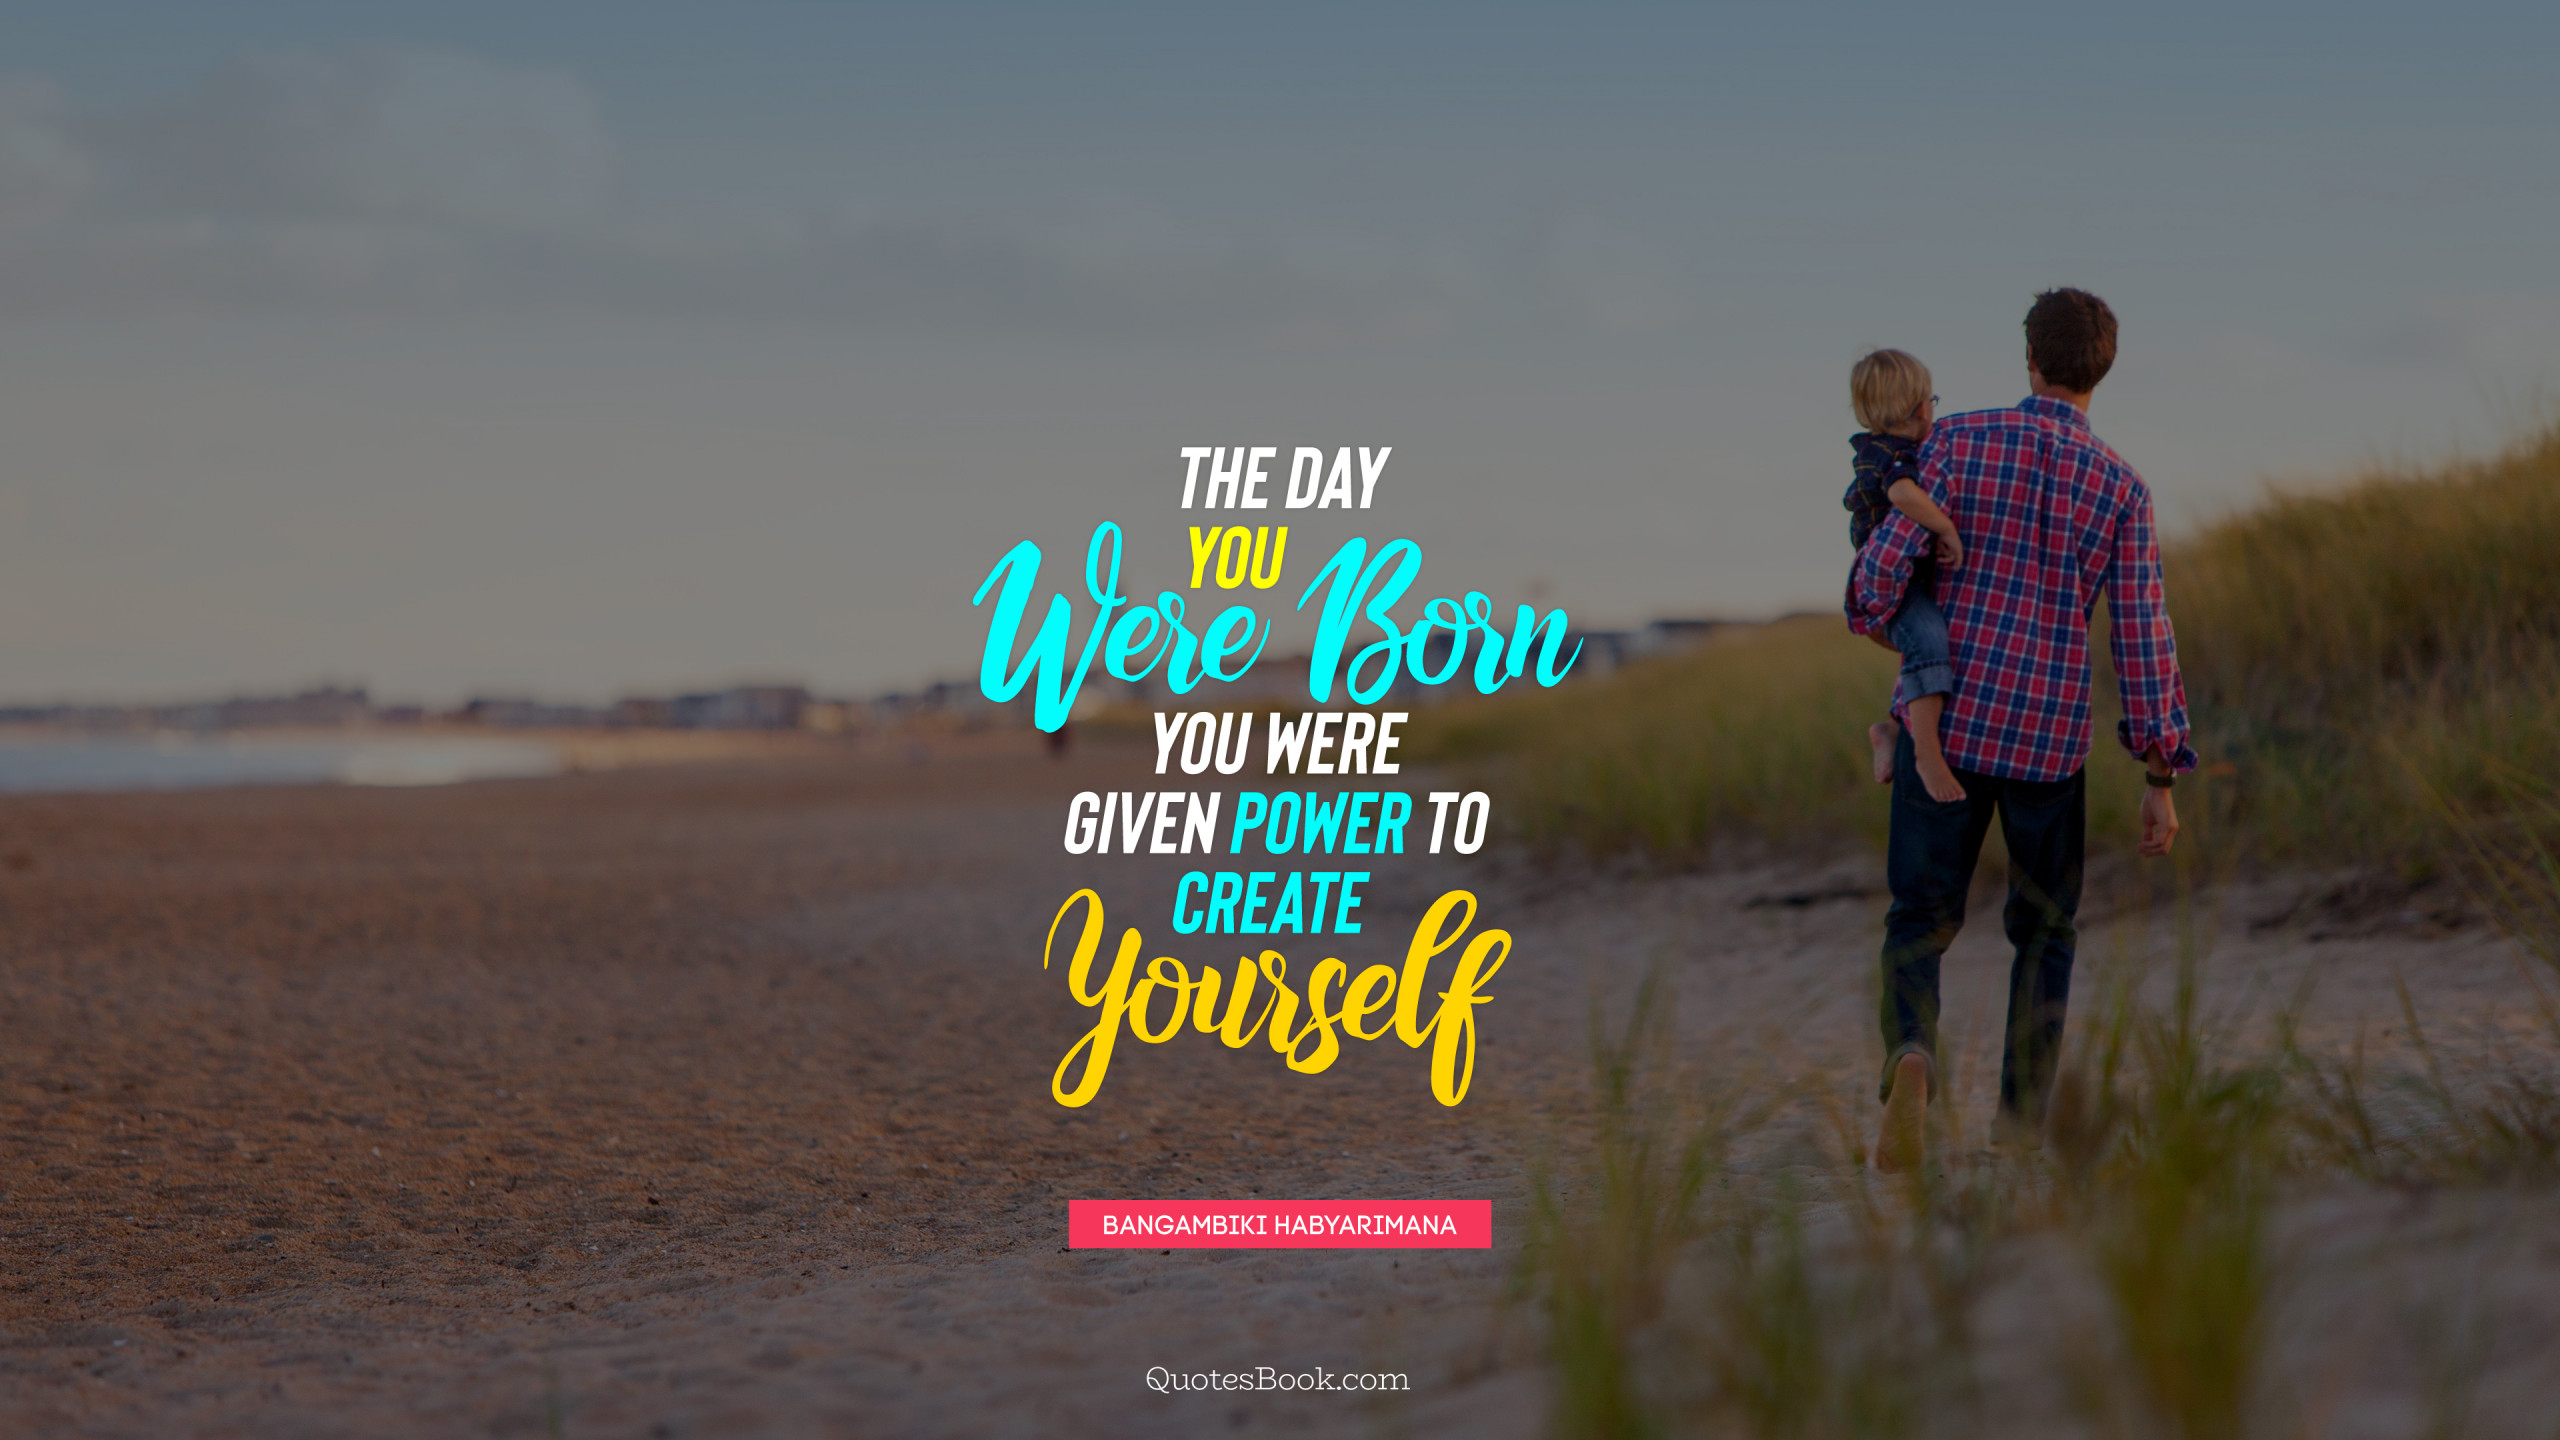 The day you were born you were given power to create yourself. - Quote